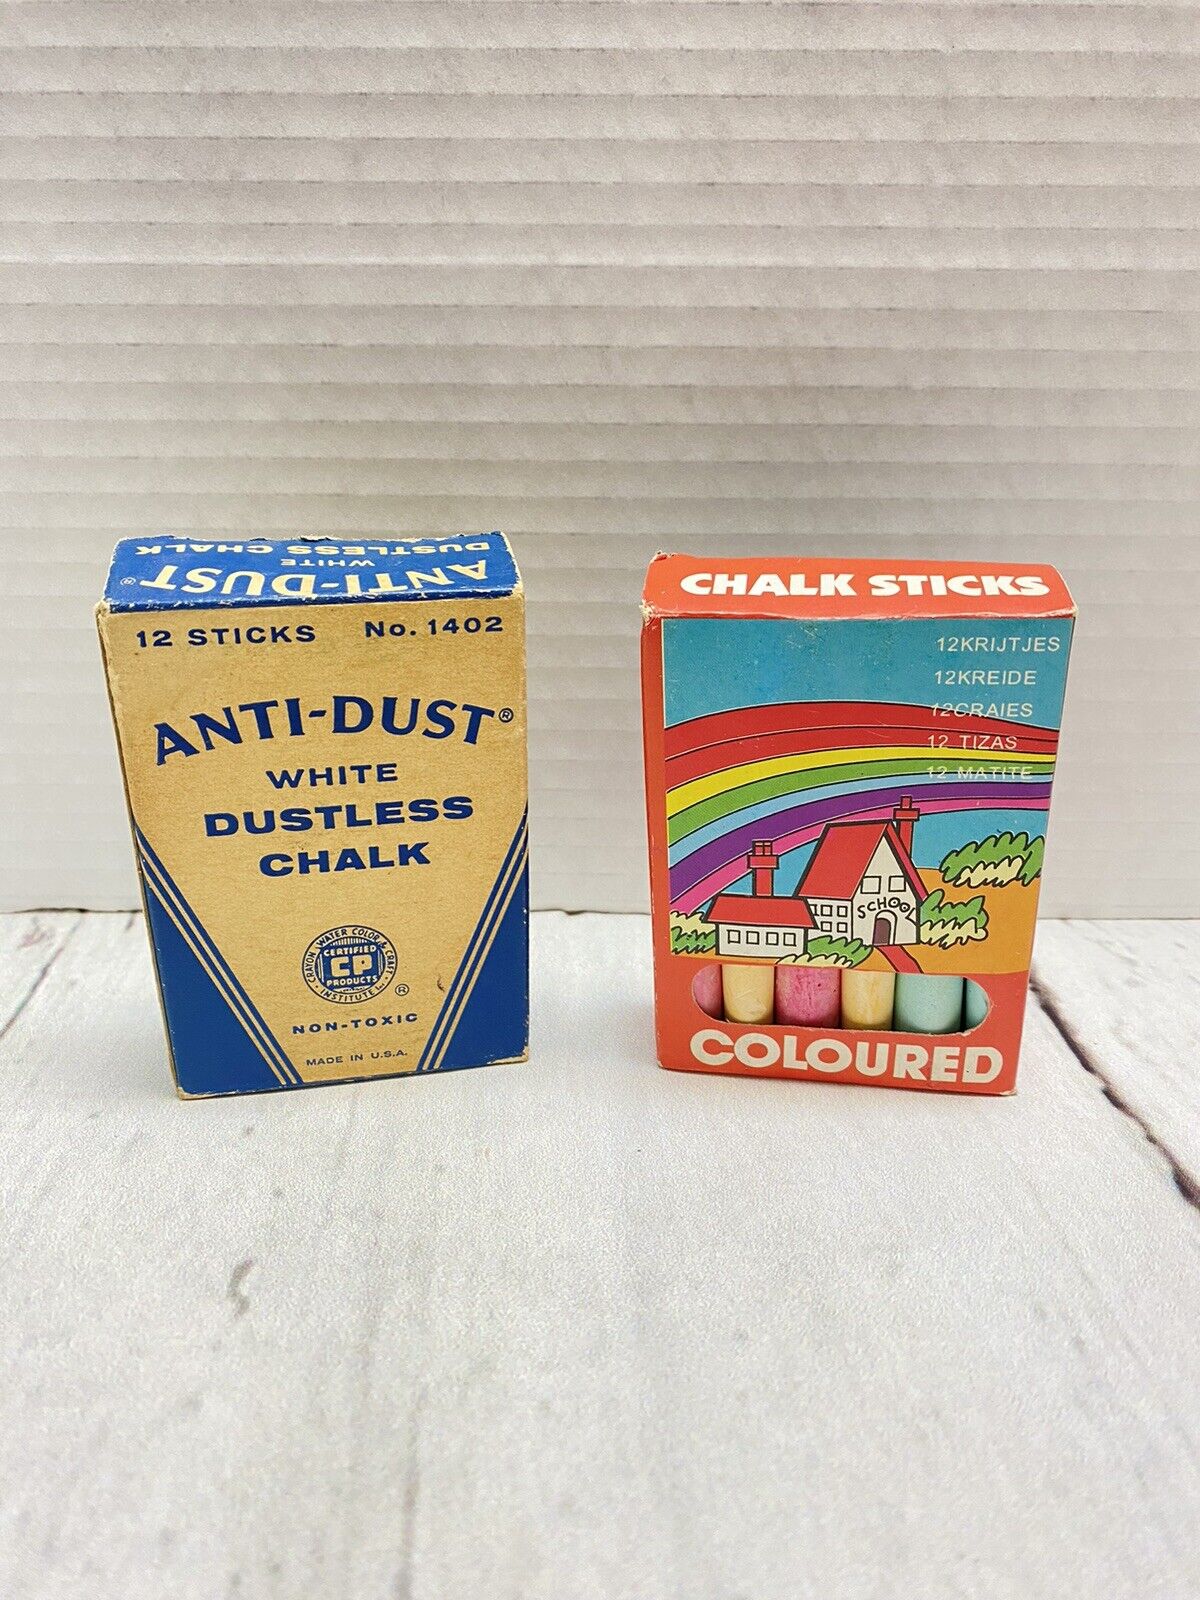 Vintage Chalk Sticks Lot of 2 White and Colored 24 Sticks Total